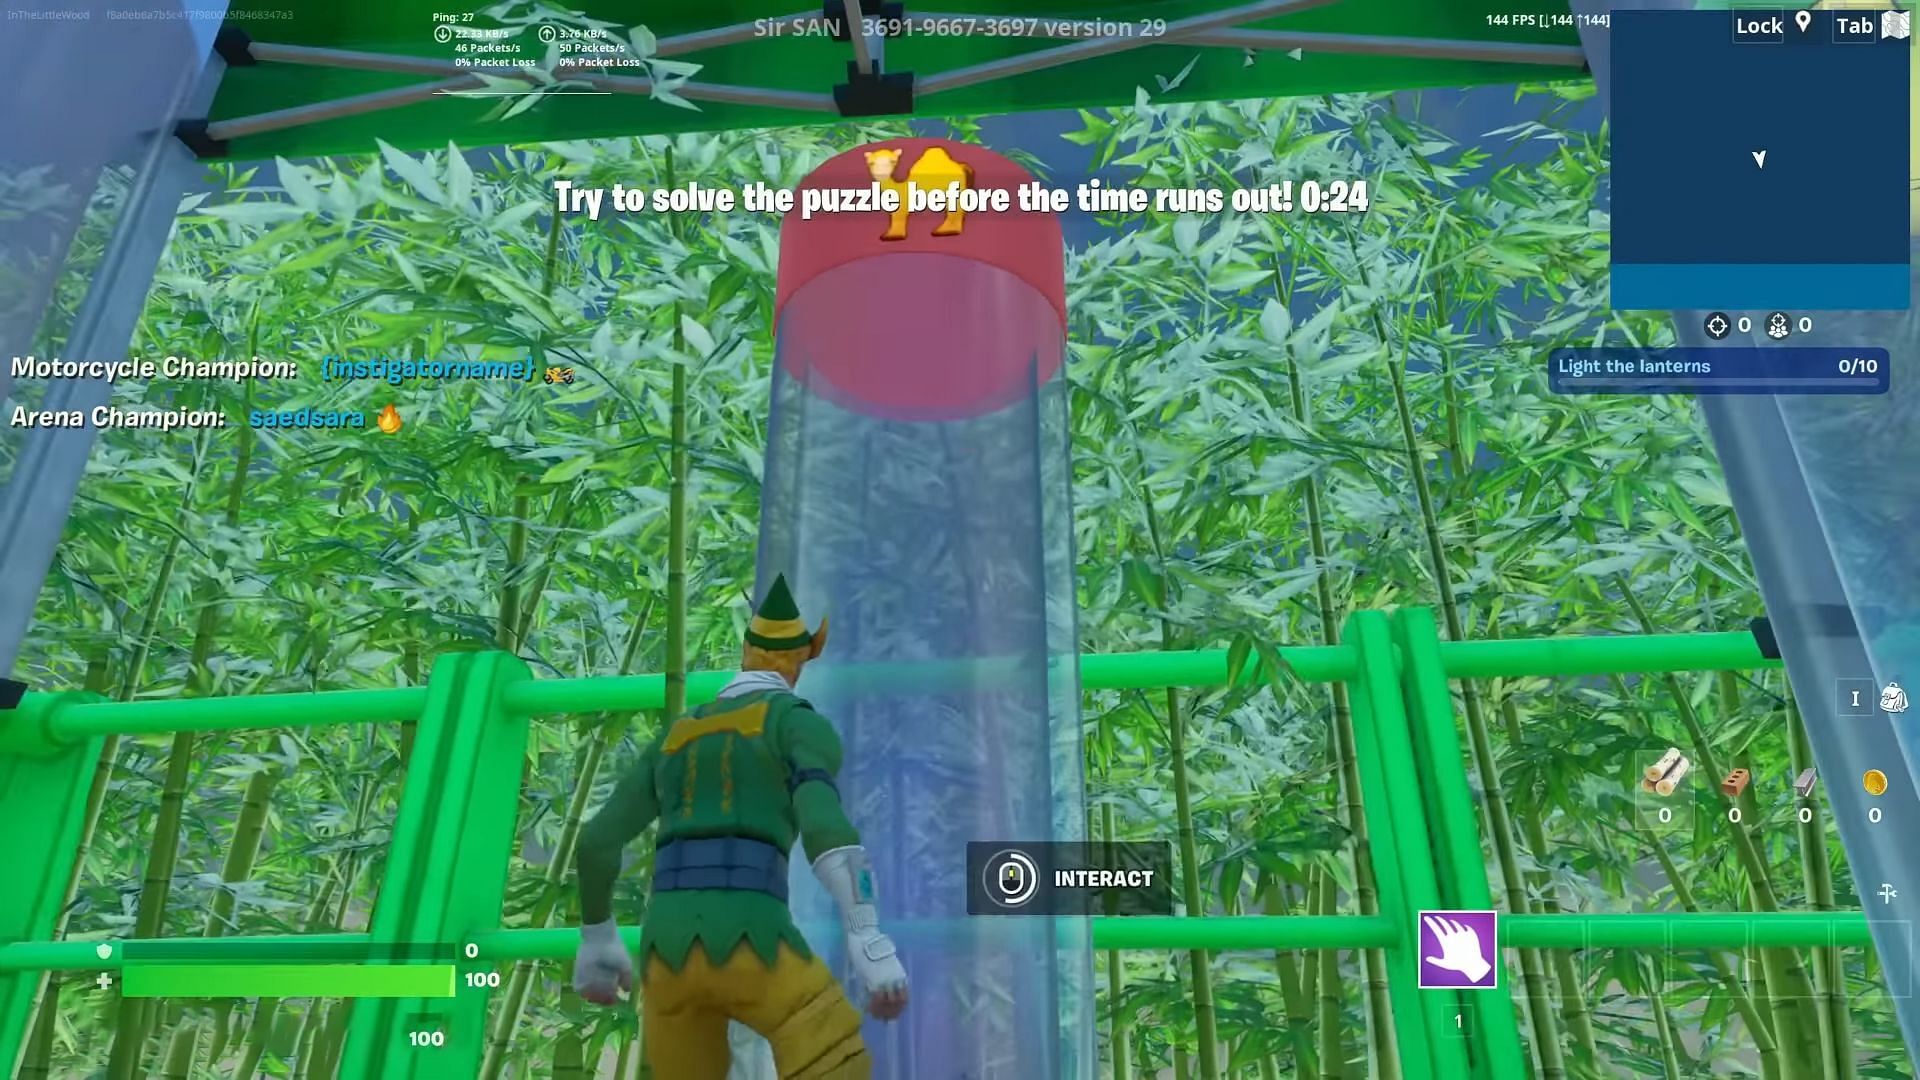 How to solve a Lantern Puzzle at the Fest Tour in Fortnite